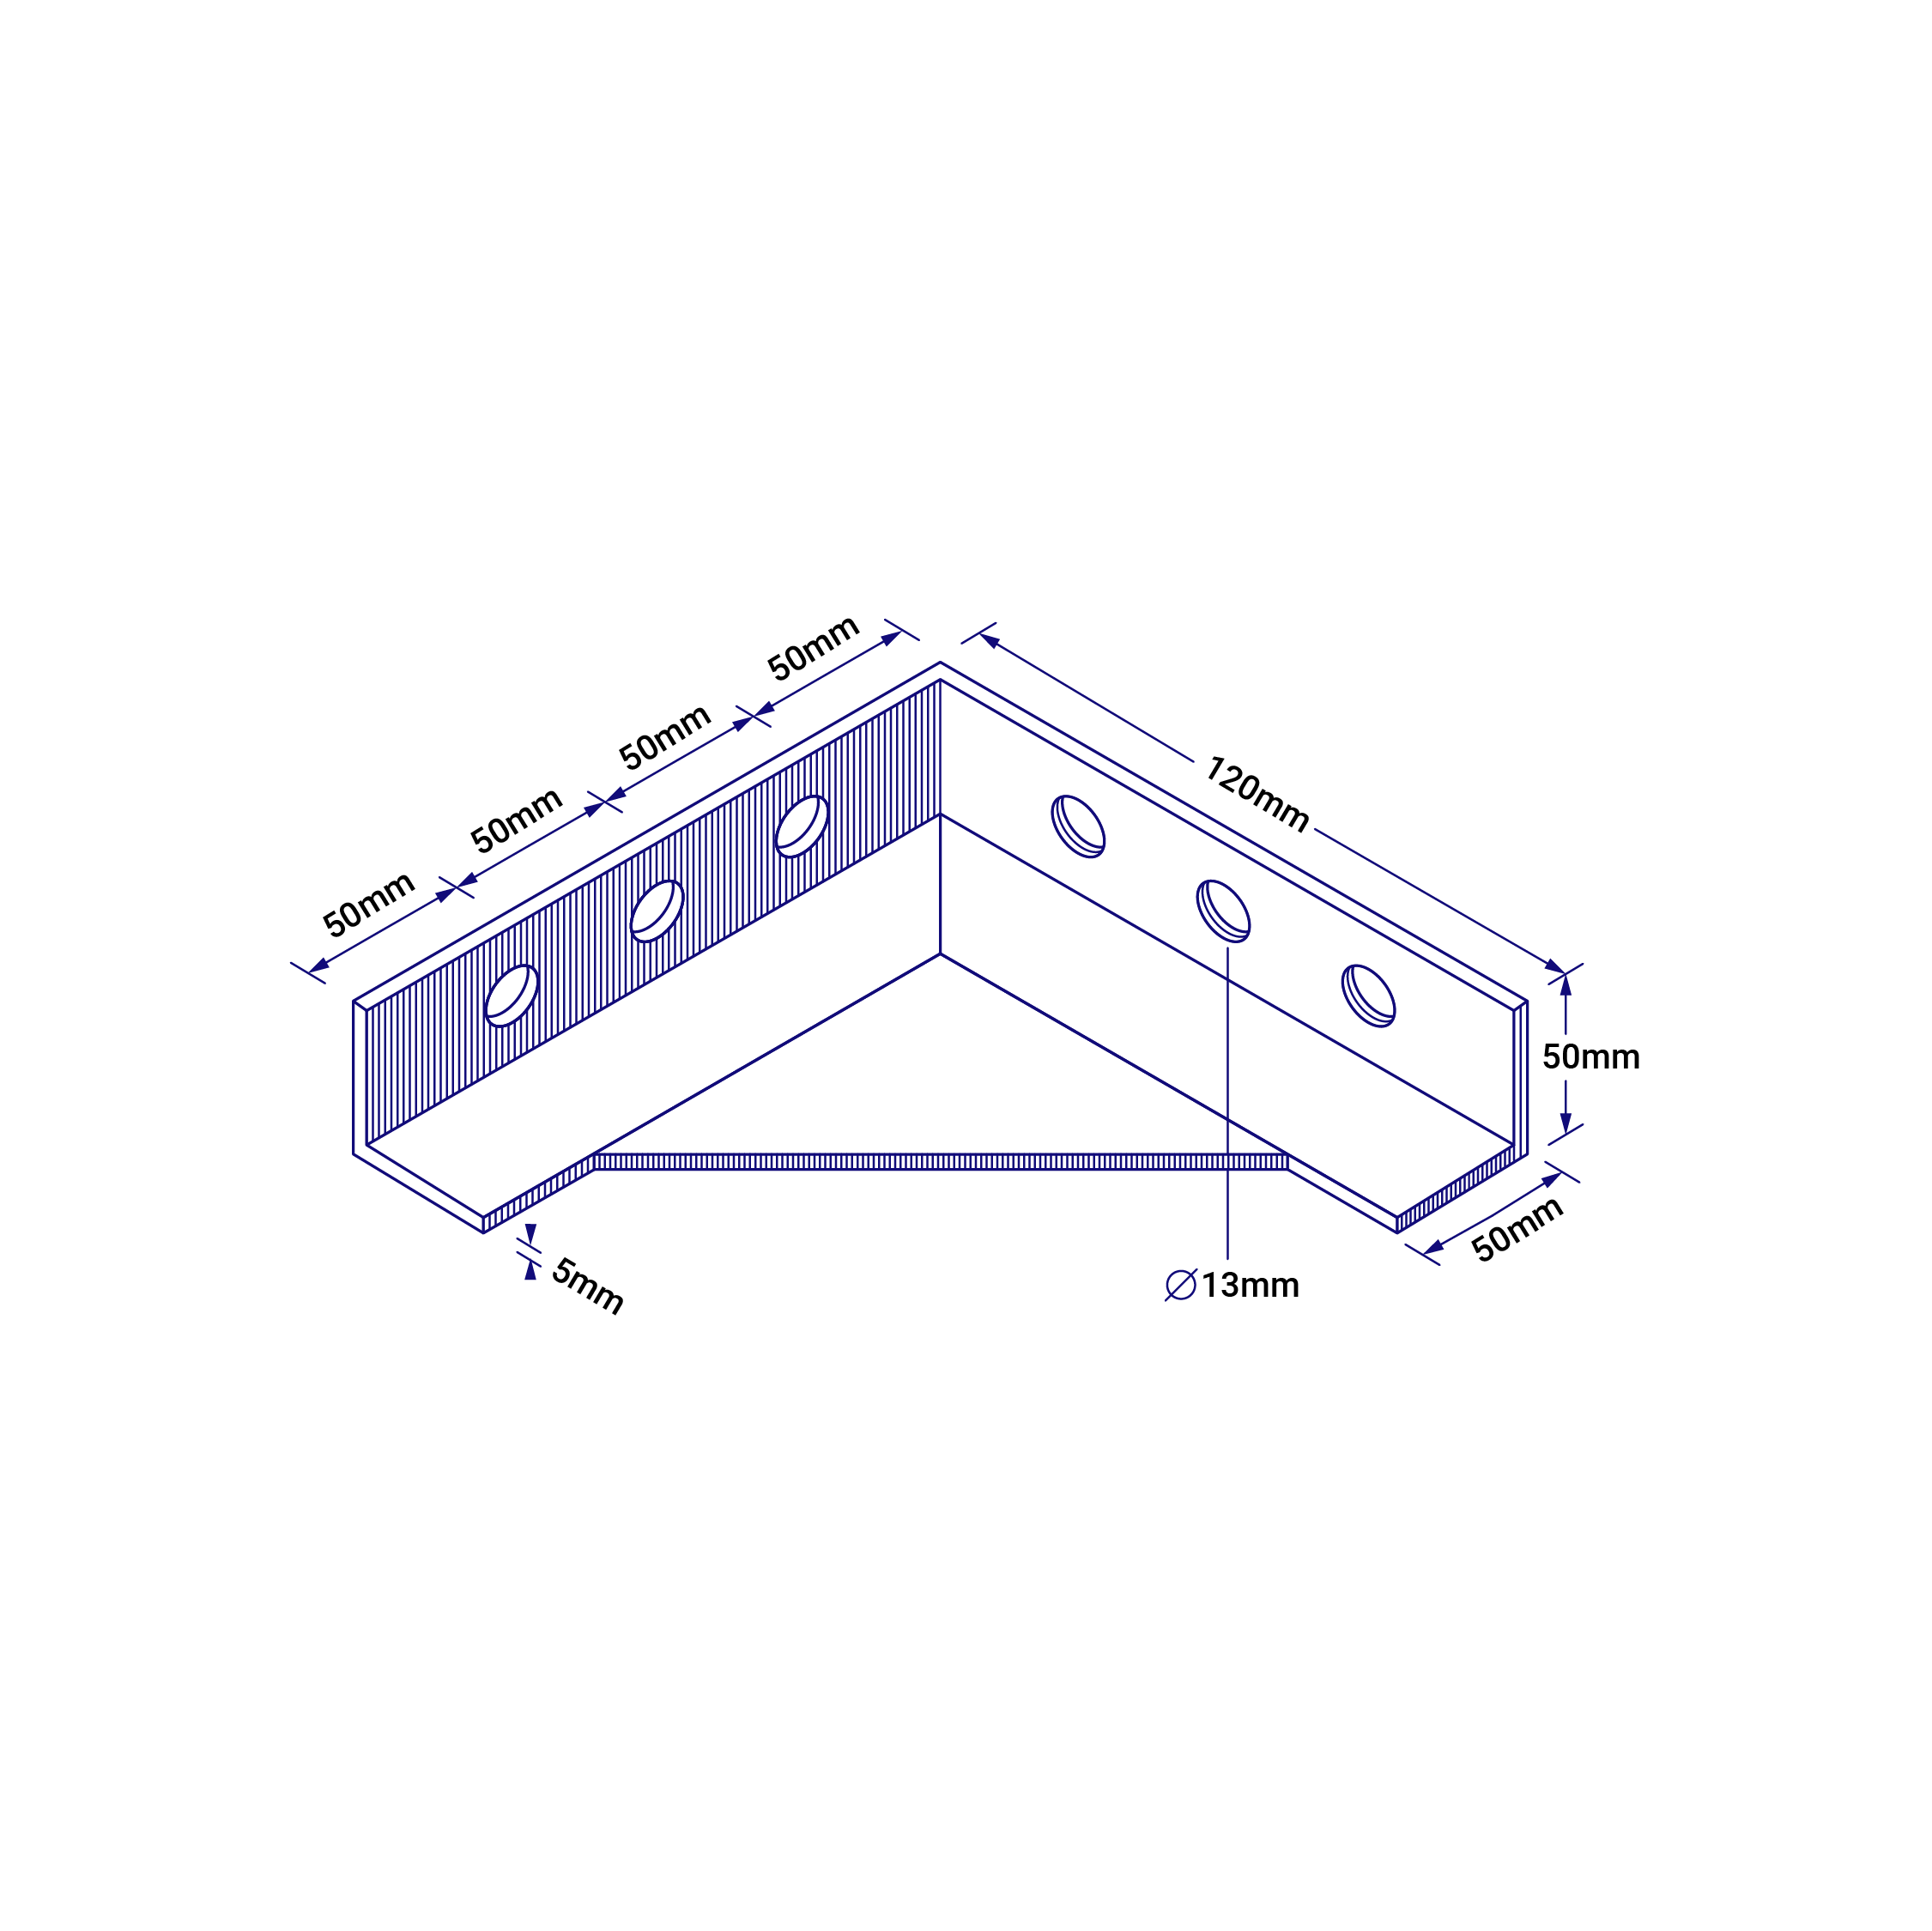 Shipping Container Gallows Bracket dimensions drawing